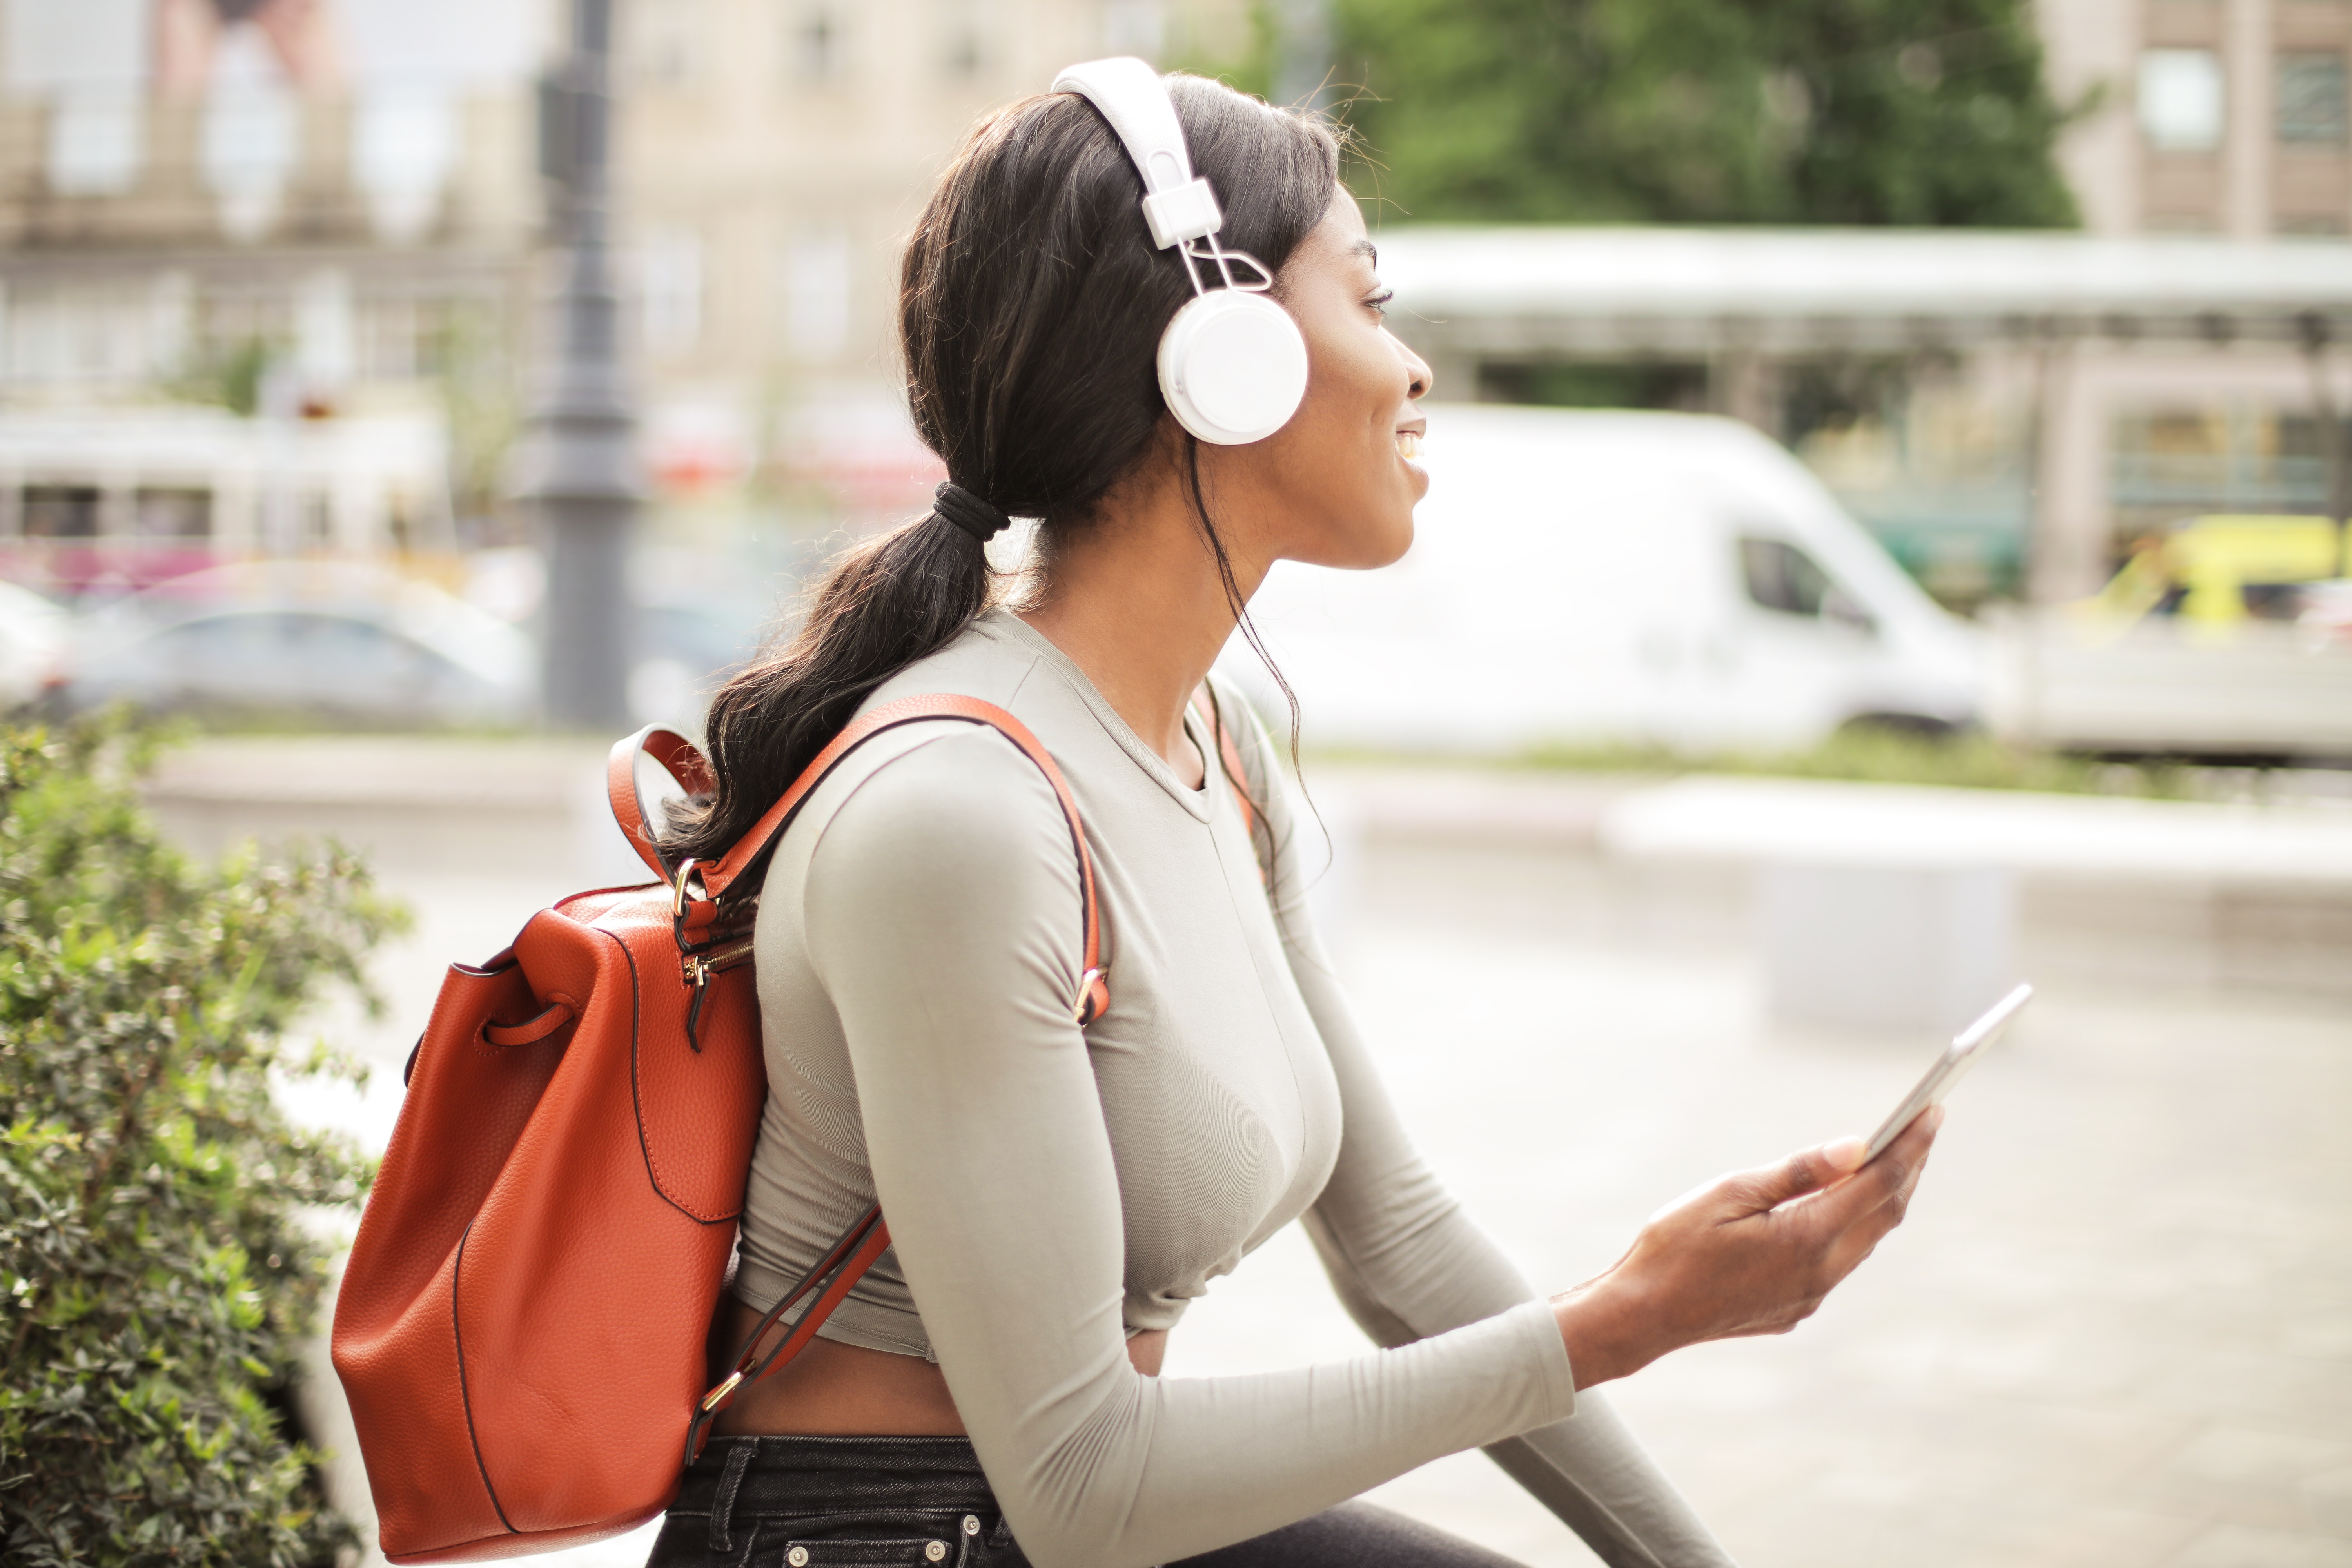 Canva Shallow Focus Photo of Woman Holding Smartphone While Listening to Music